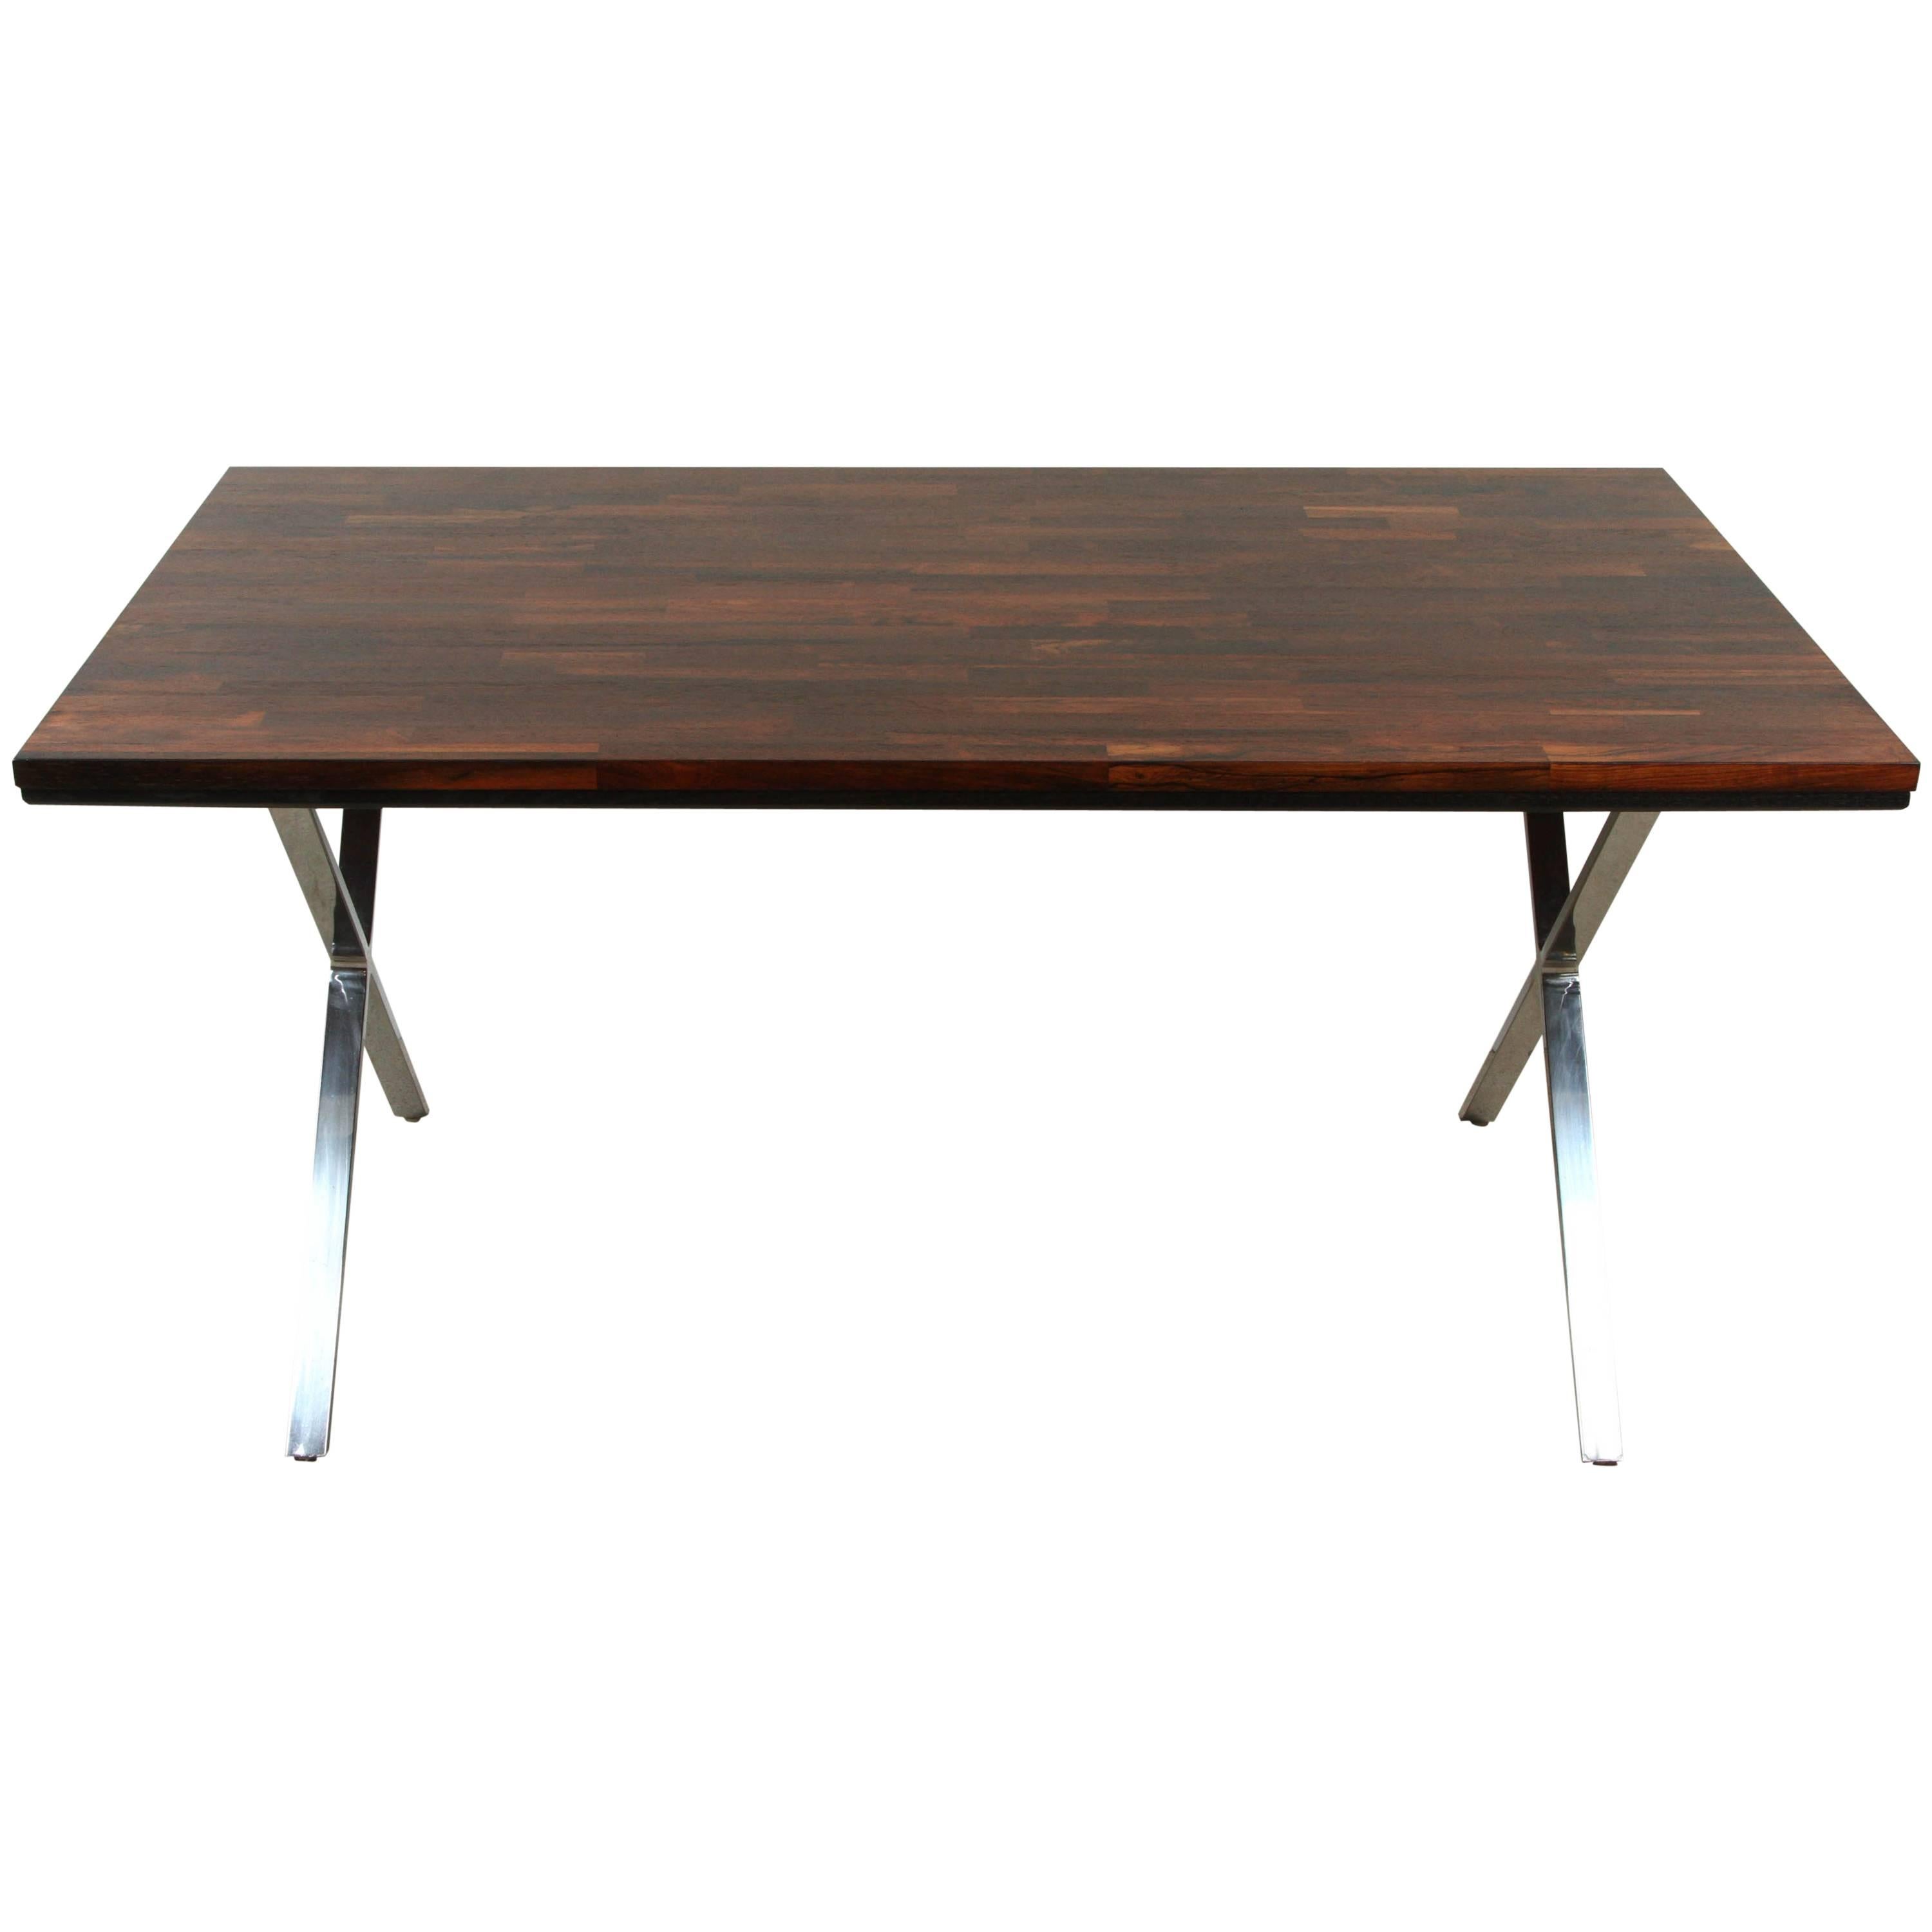 Solid Rosewood Desk with Stainless Base by Jules Heumann for Metropolitan Group